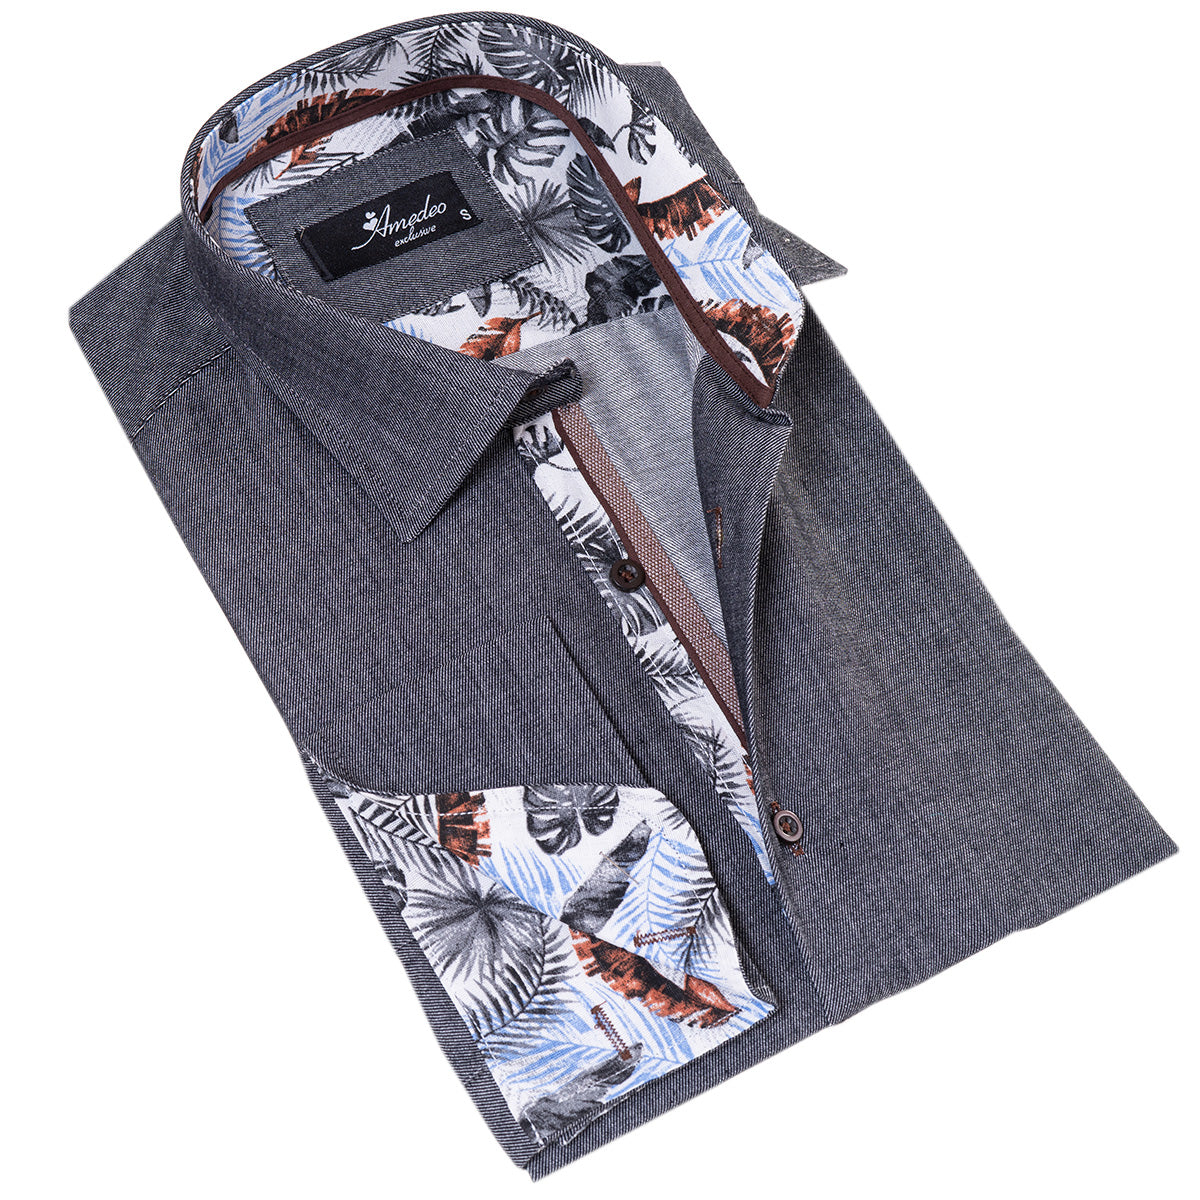 Gray inside Tropical Printed Mens Slim Fit Designer French Cuff Shirt - tailored Cotton Shirts for Work and Casual Wear